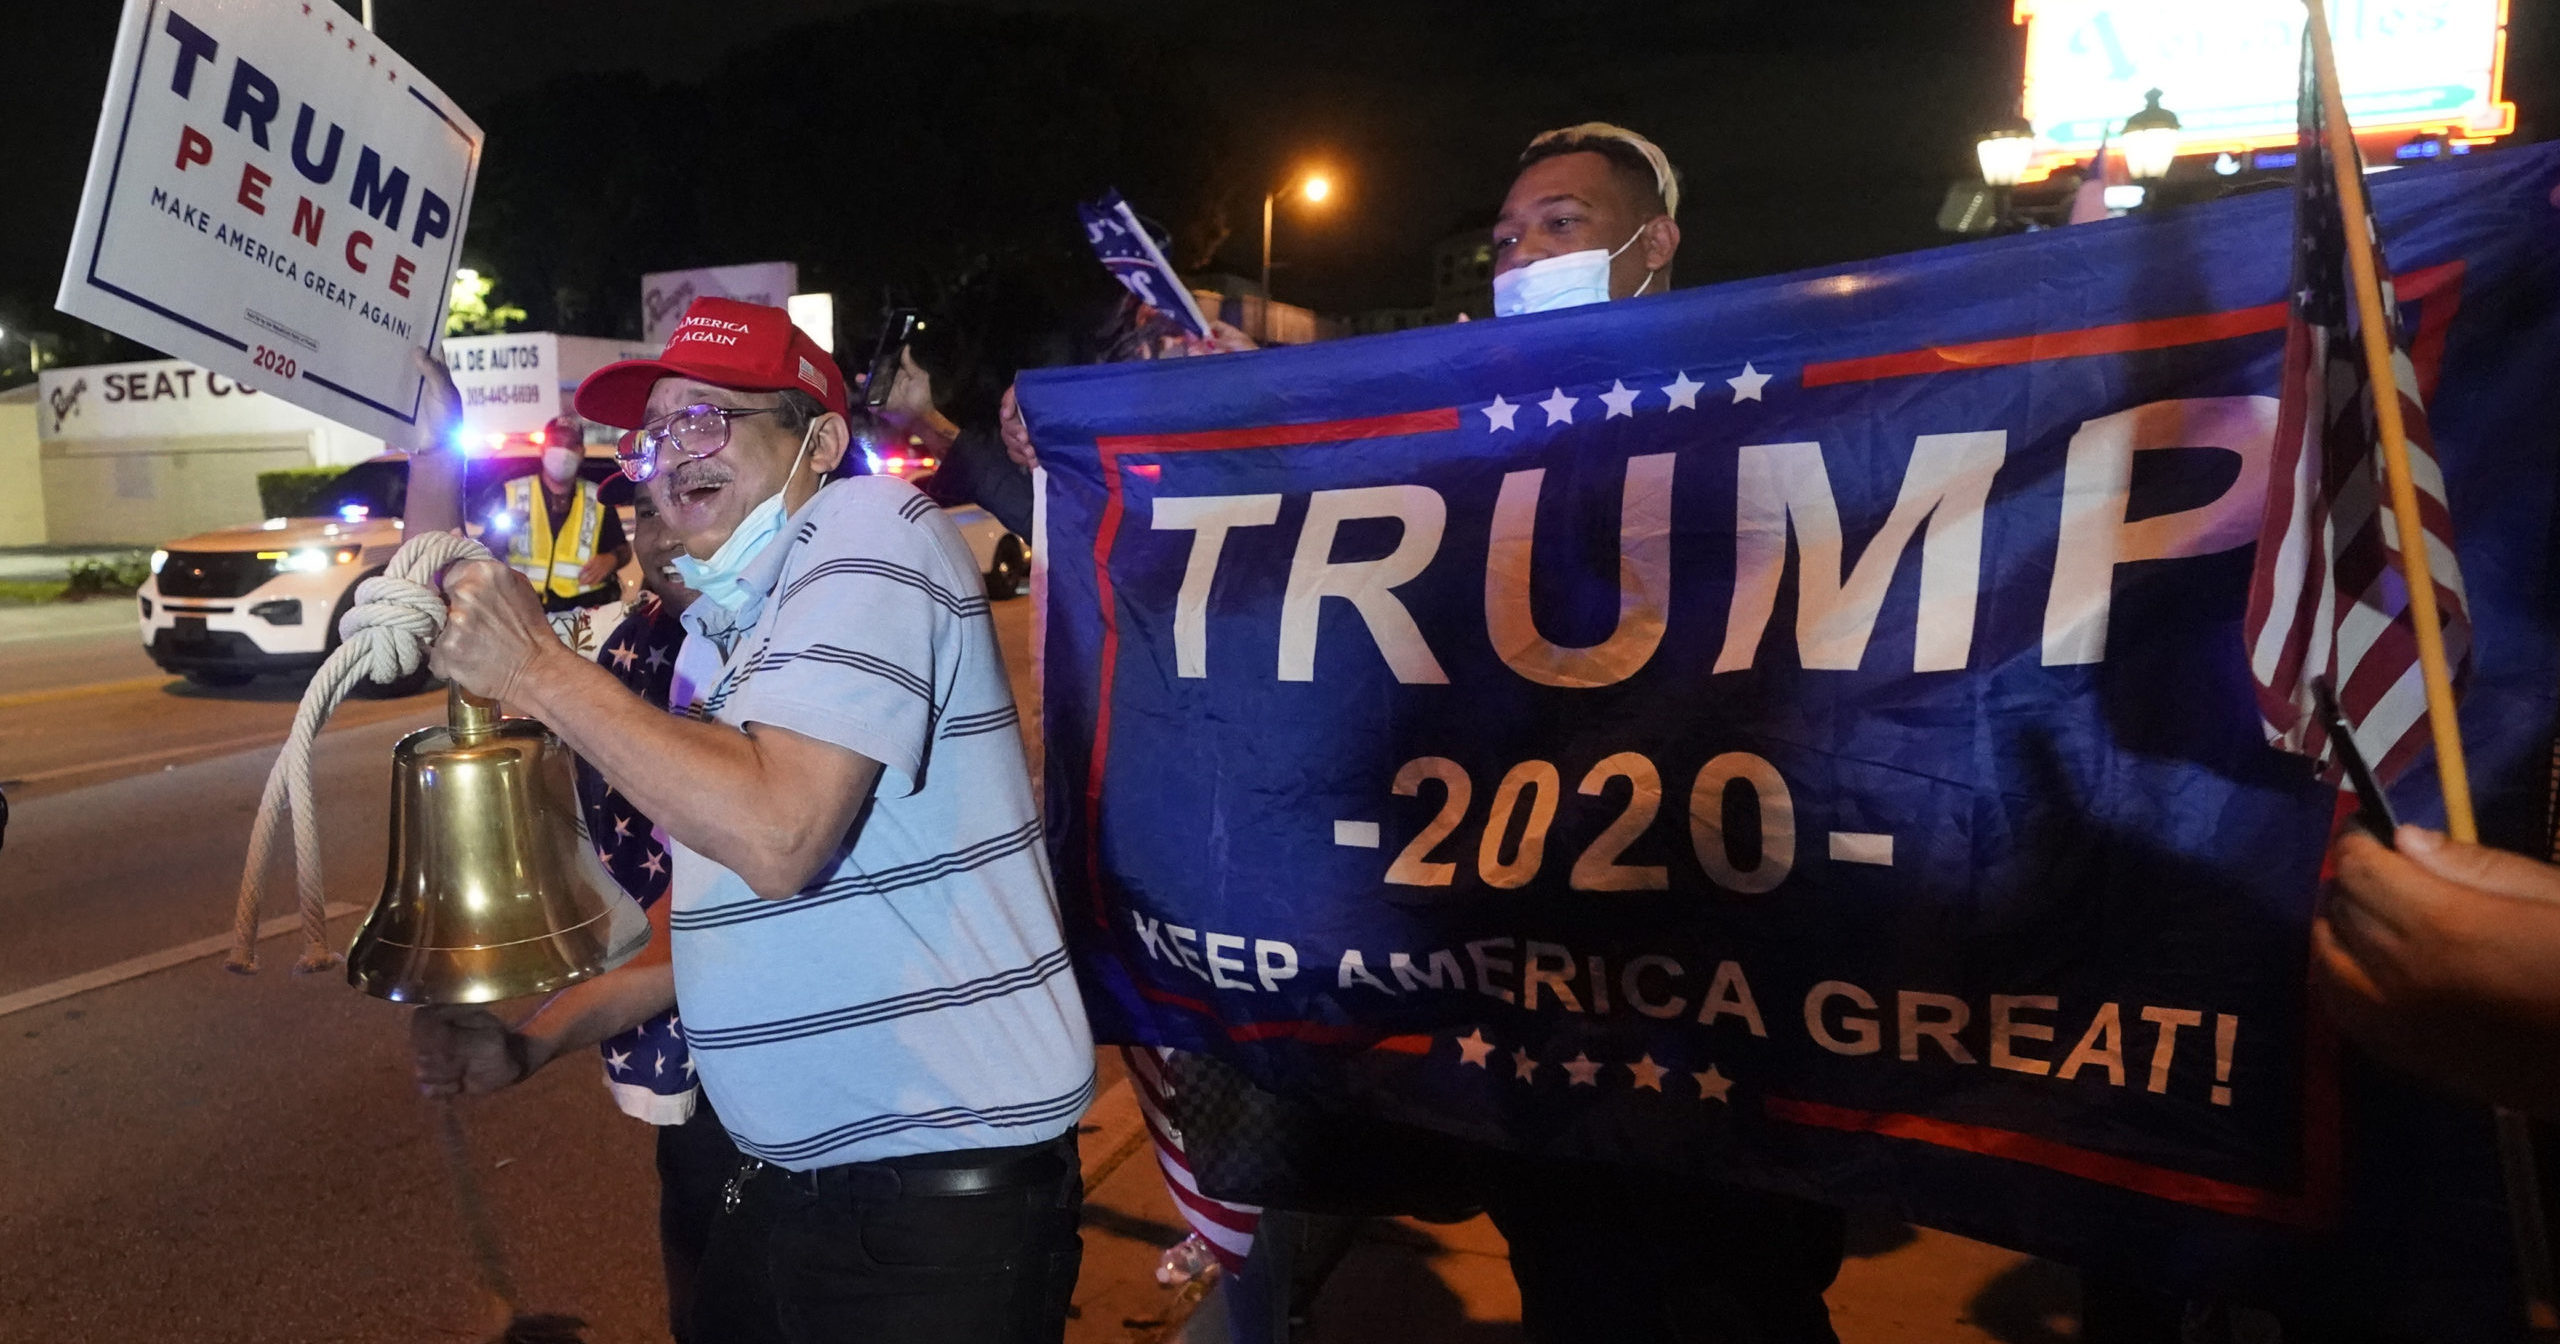 In this Nov. 3, 2020, photo, supporters of President Donald Trump chant and wave flags outside a Cuban restaurant during a celebration on election night in the Little Havana neighborhood of Miami.